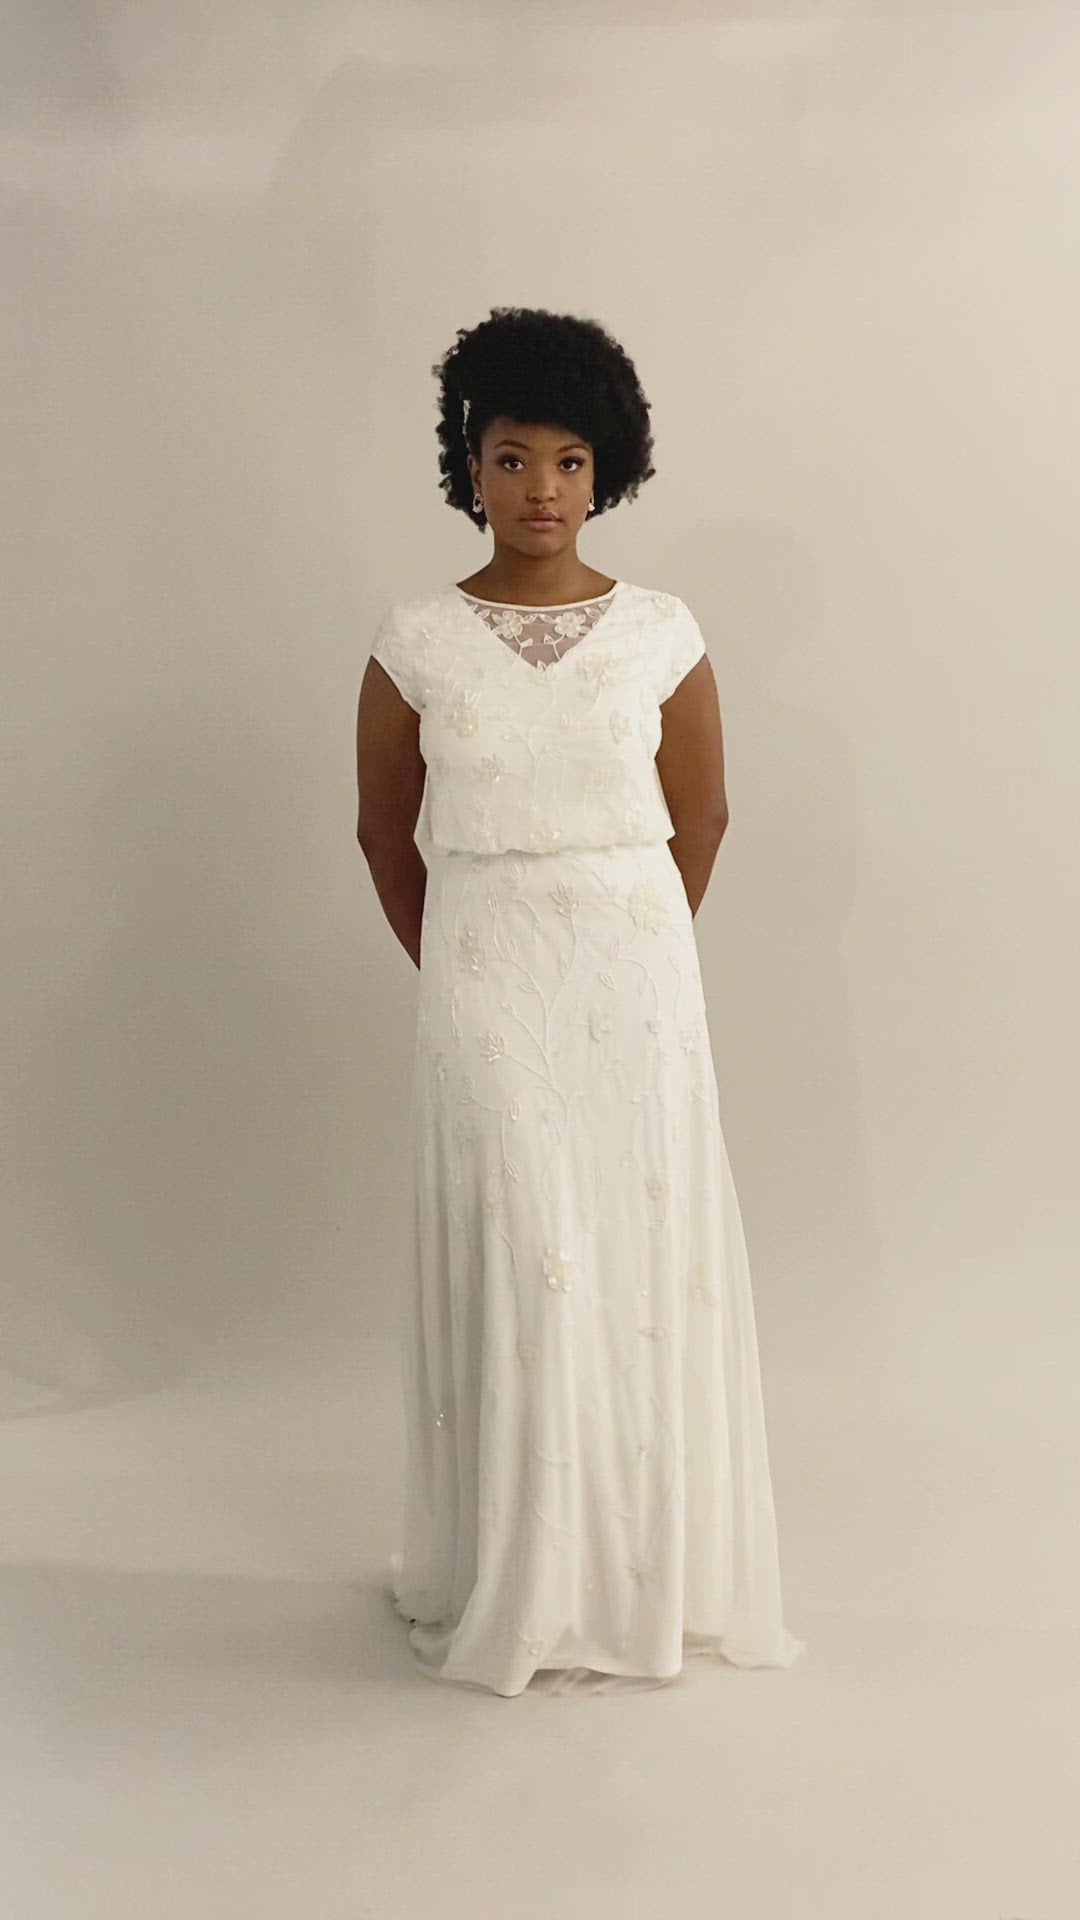 Video of fitted modest wedding dress with cap sleeves. This dress has sheet lace and a fitted fit. It has a v-neckline with a lace scoop neckline overtop.